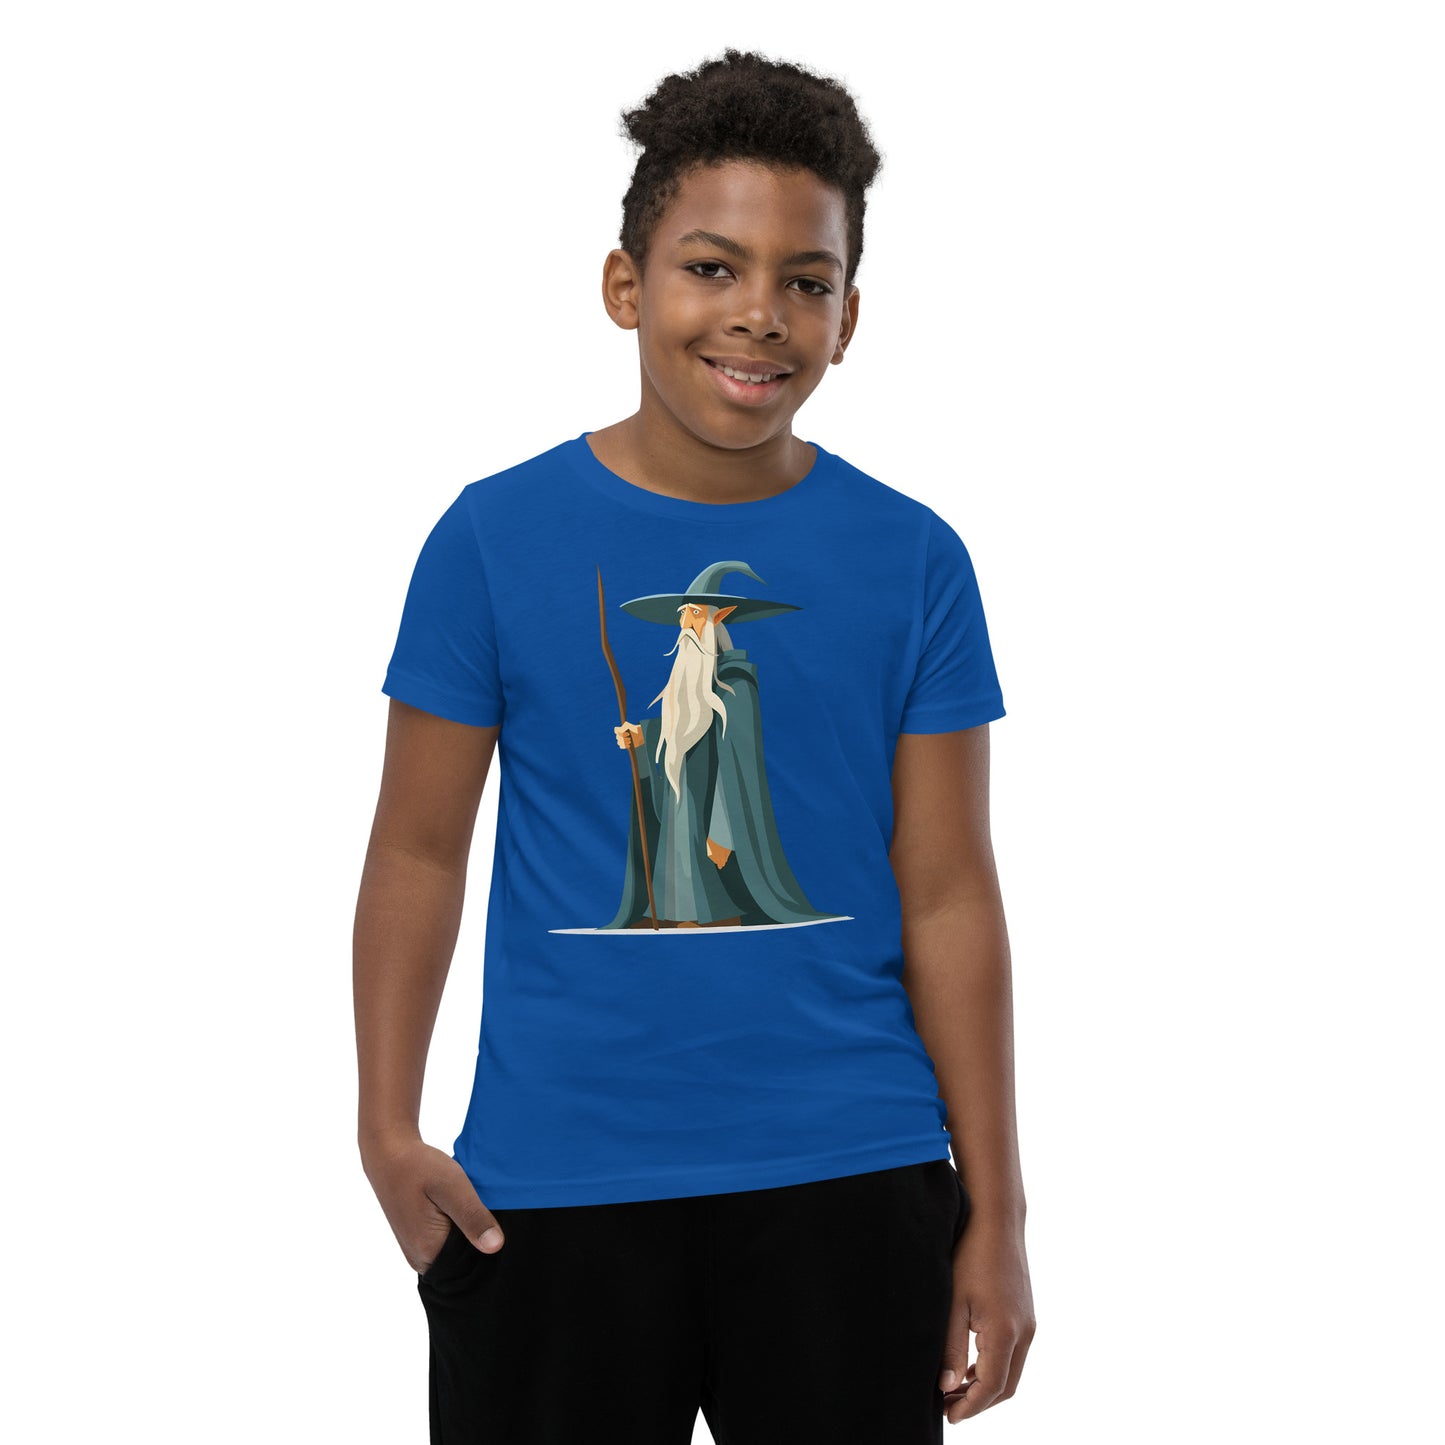 Boy with a royal blue T-shirt with a picture of a magician